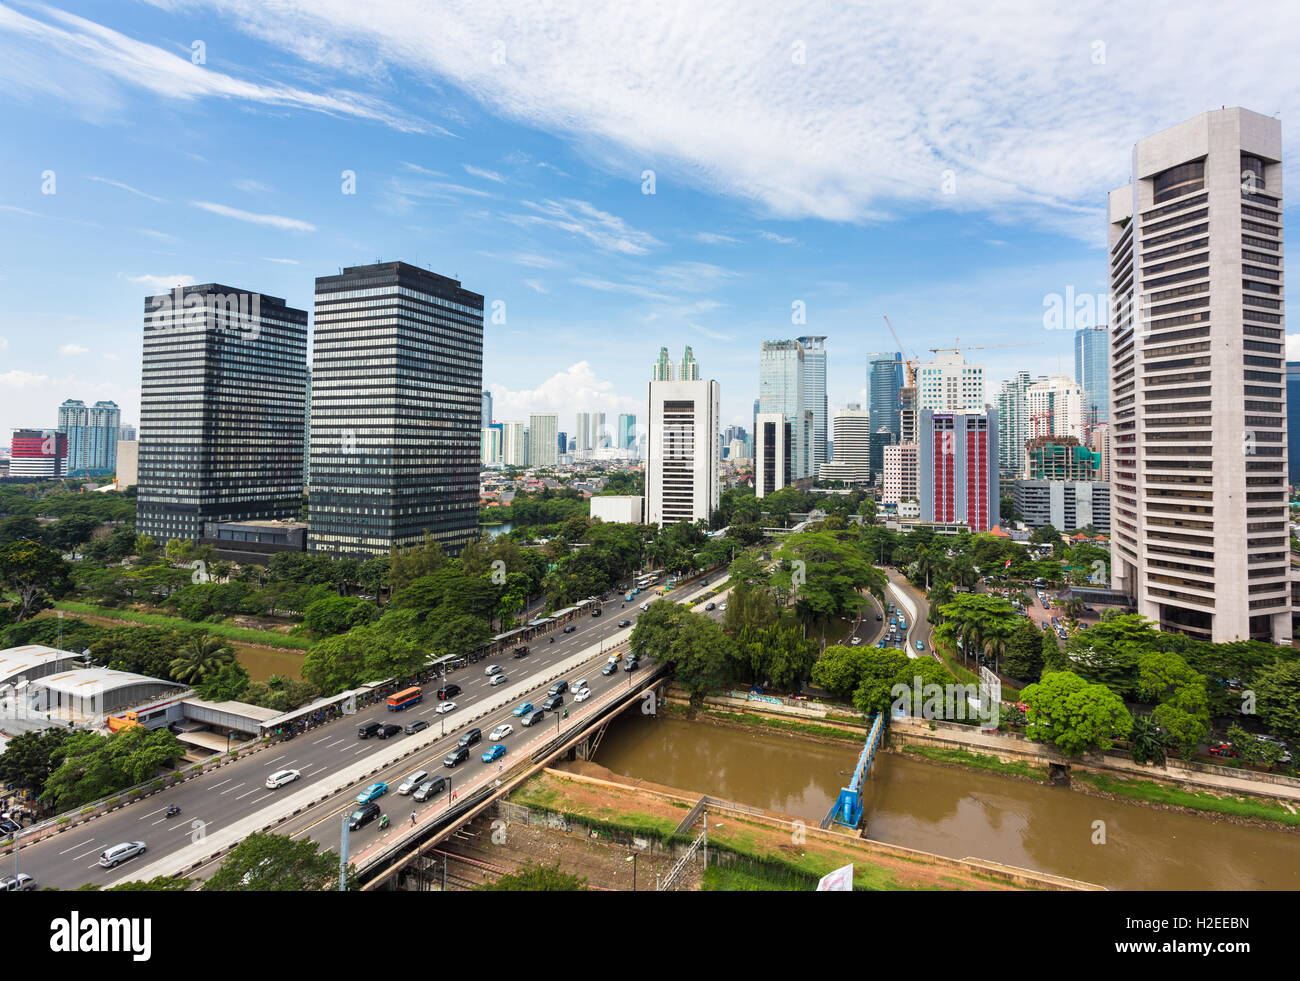 Jakarta skyline with modern office towers along Jalan Sudirman in Indonesia capital city business district. Stock Photo